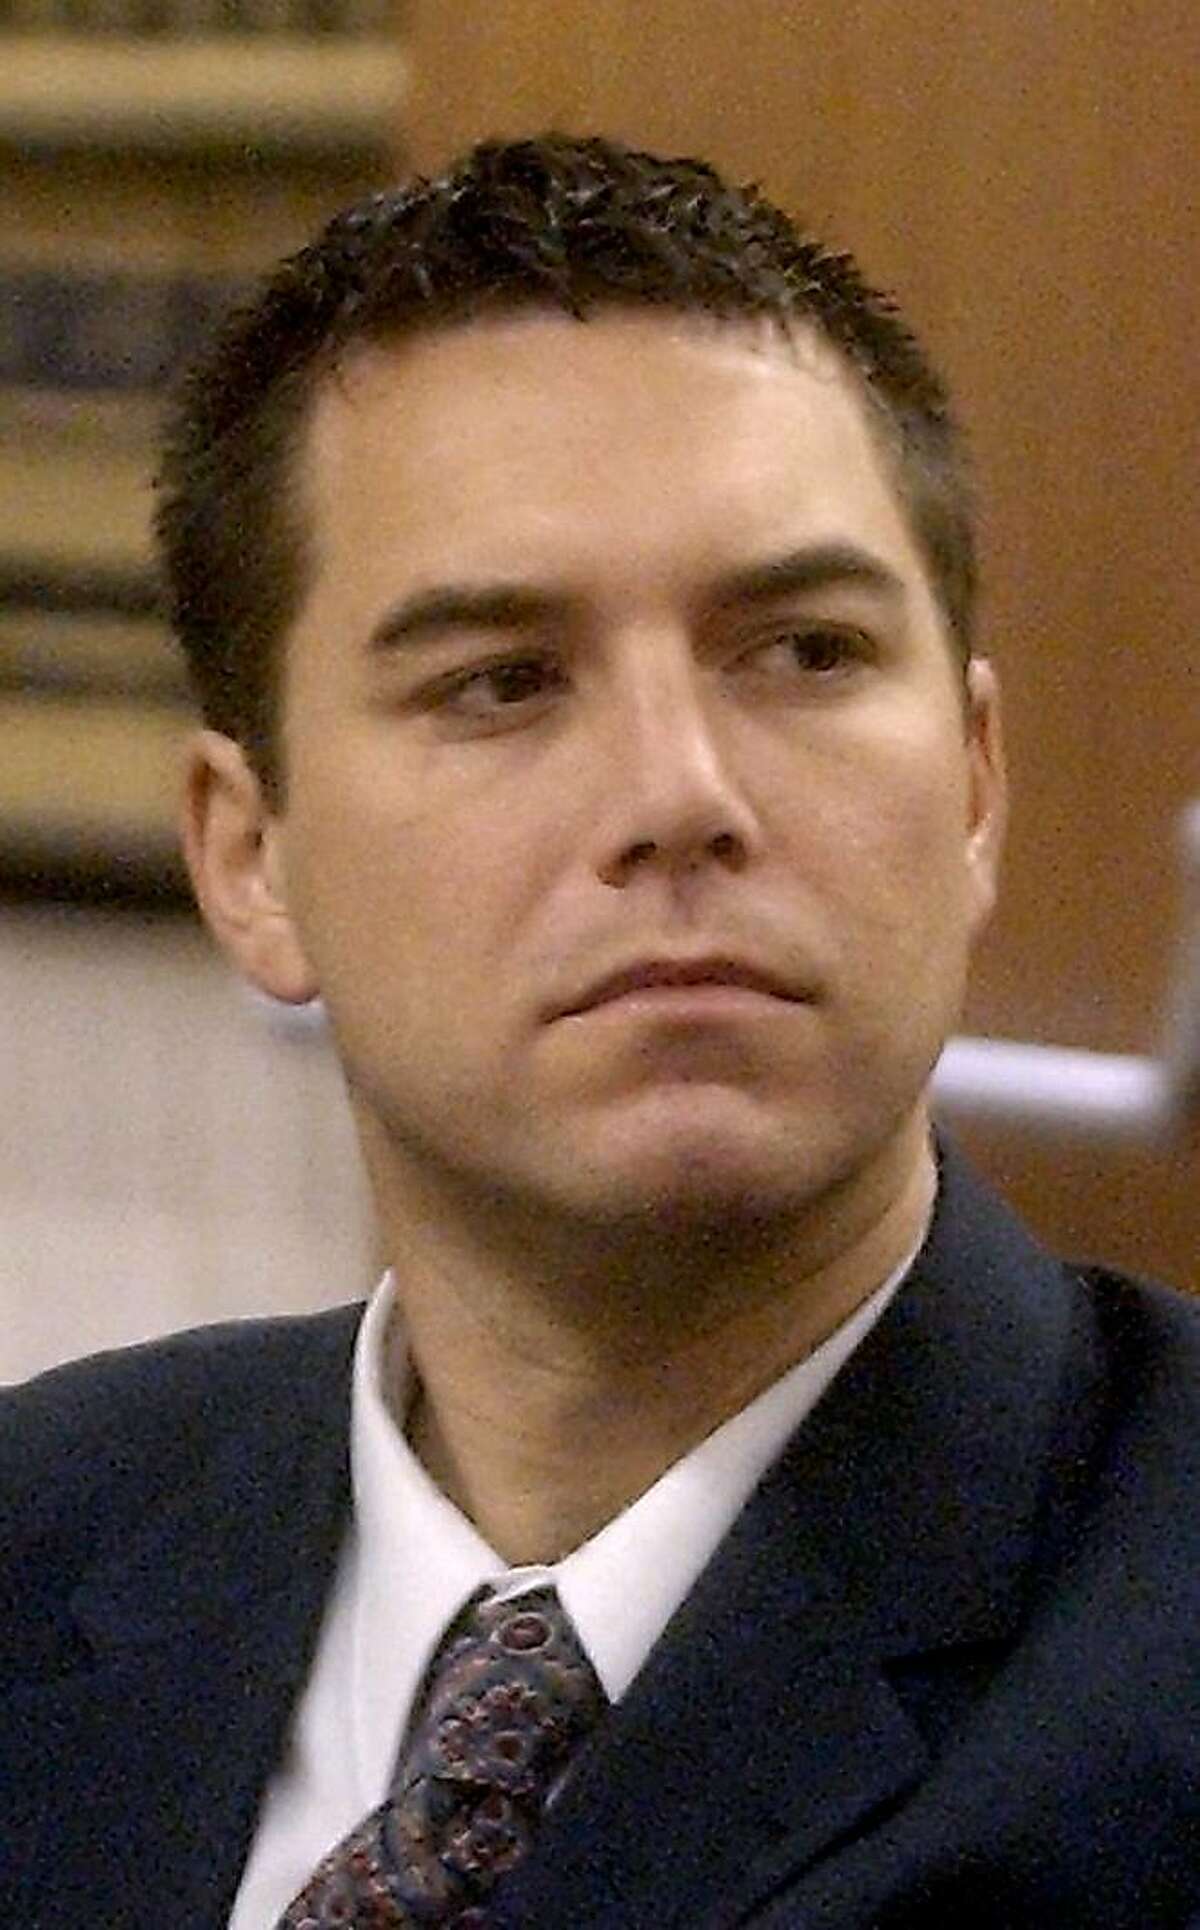 Scott Peterson is shown in this Sept. 2, 2003 photo. Peterson will stand trial on two counts of murder for the death of his wife, Laci Peterson, and her unborn son, charges that could bring the death penalty, a judge in Modesto, Calif., ruled Tuesday, Nov.18, 2003. (AP Photo/Pool, Al Golub)